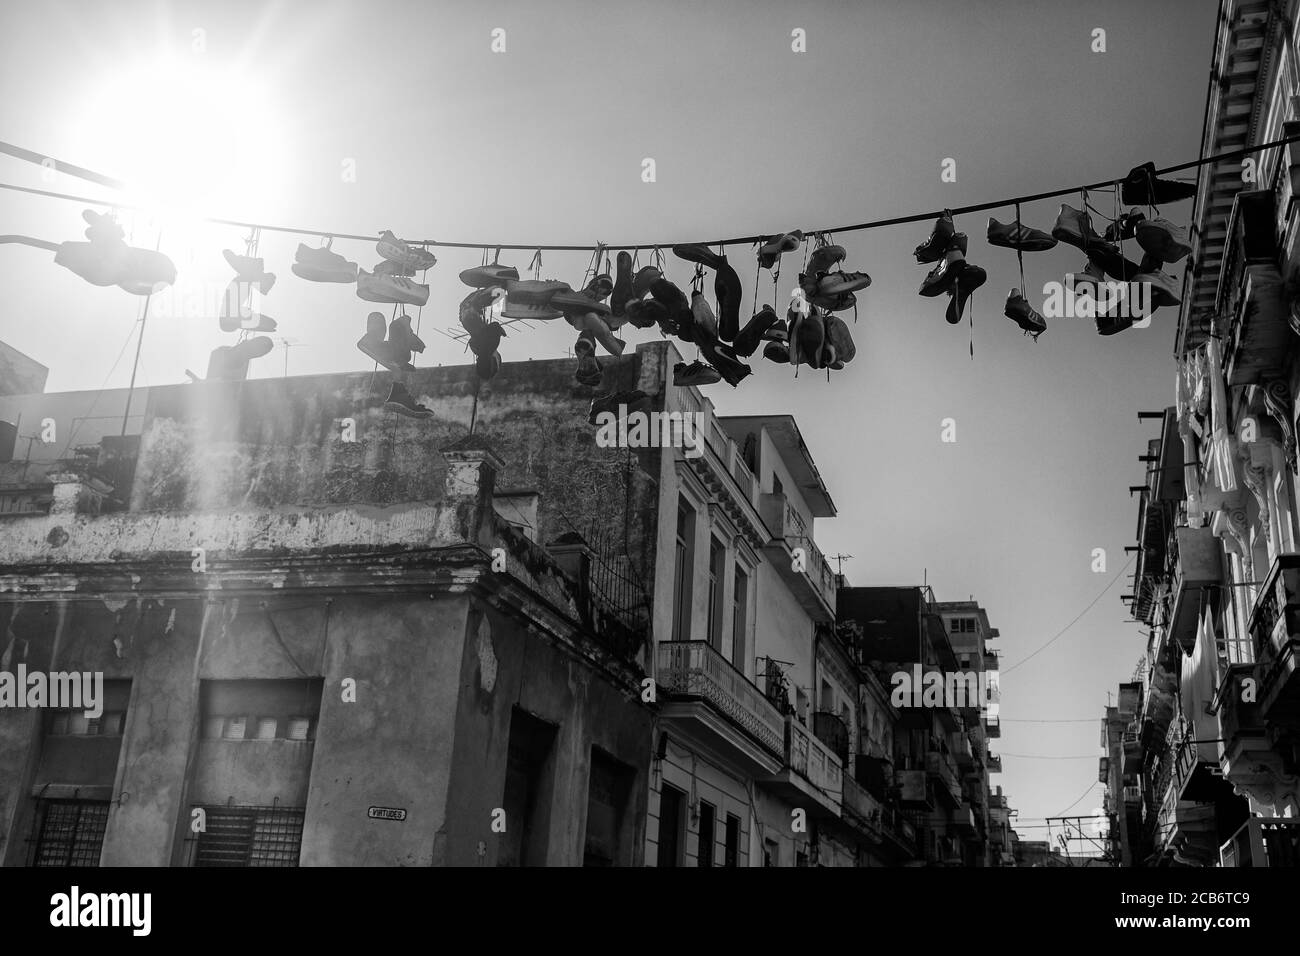 Shoes hanging on a street in La Habana Stock Photo